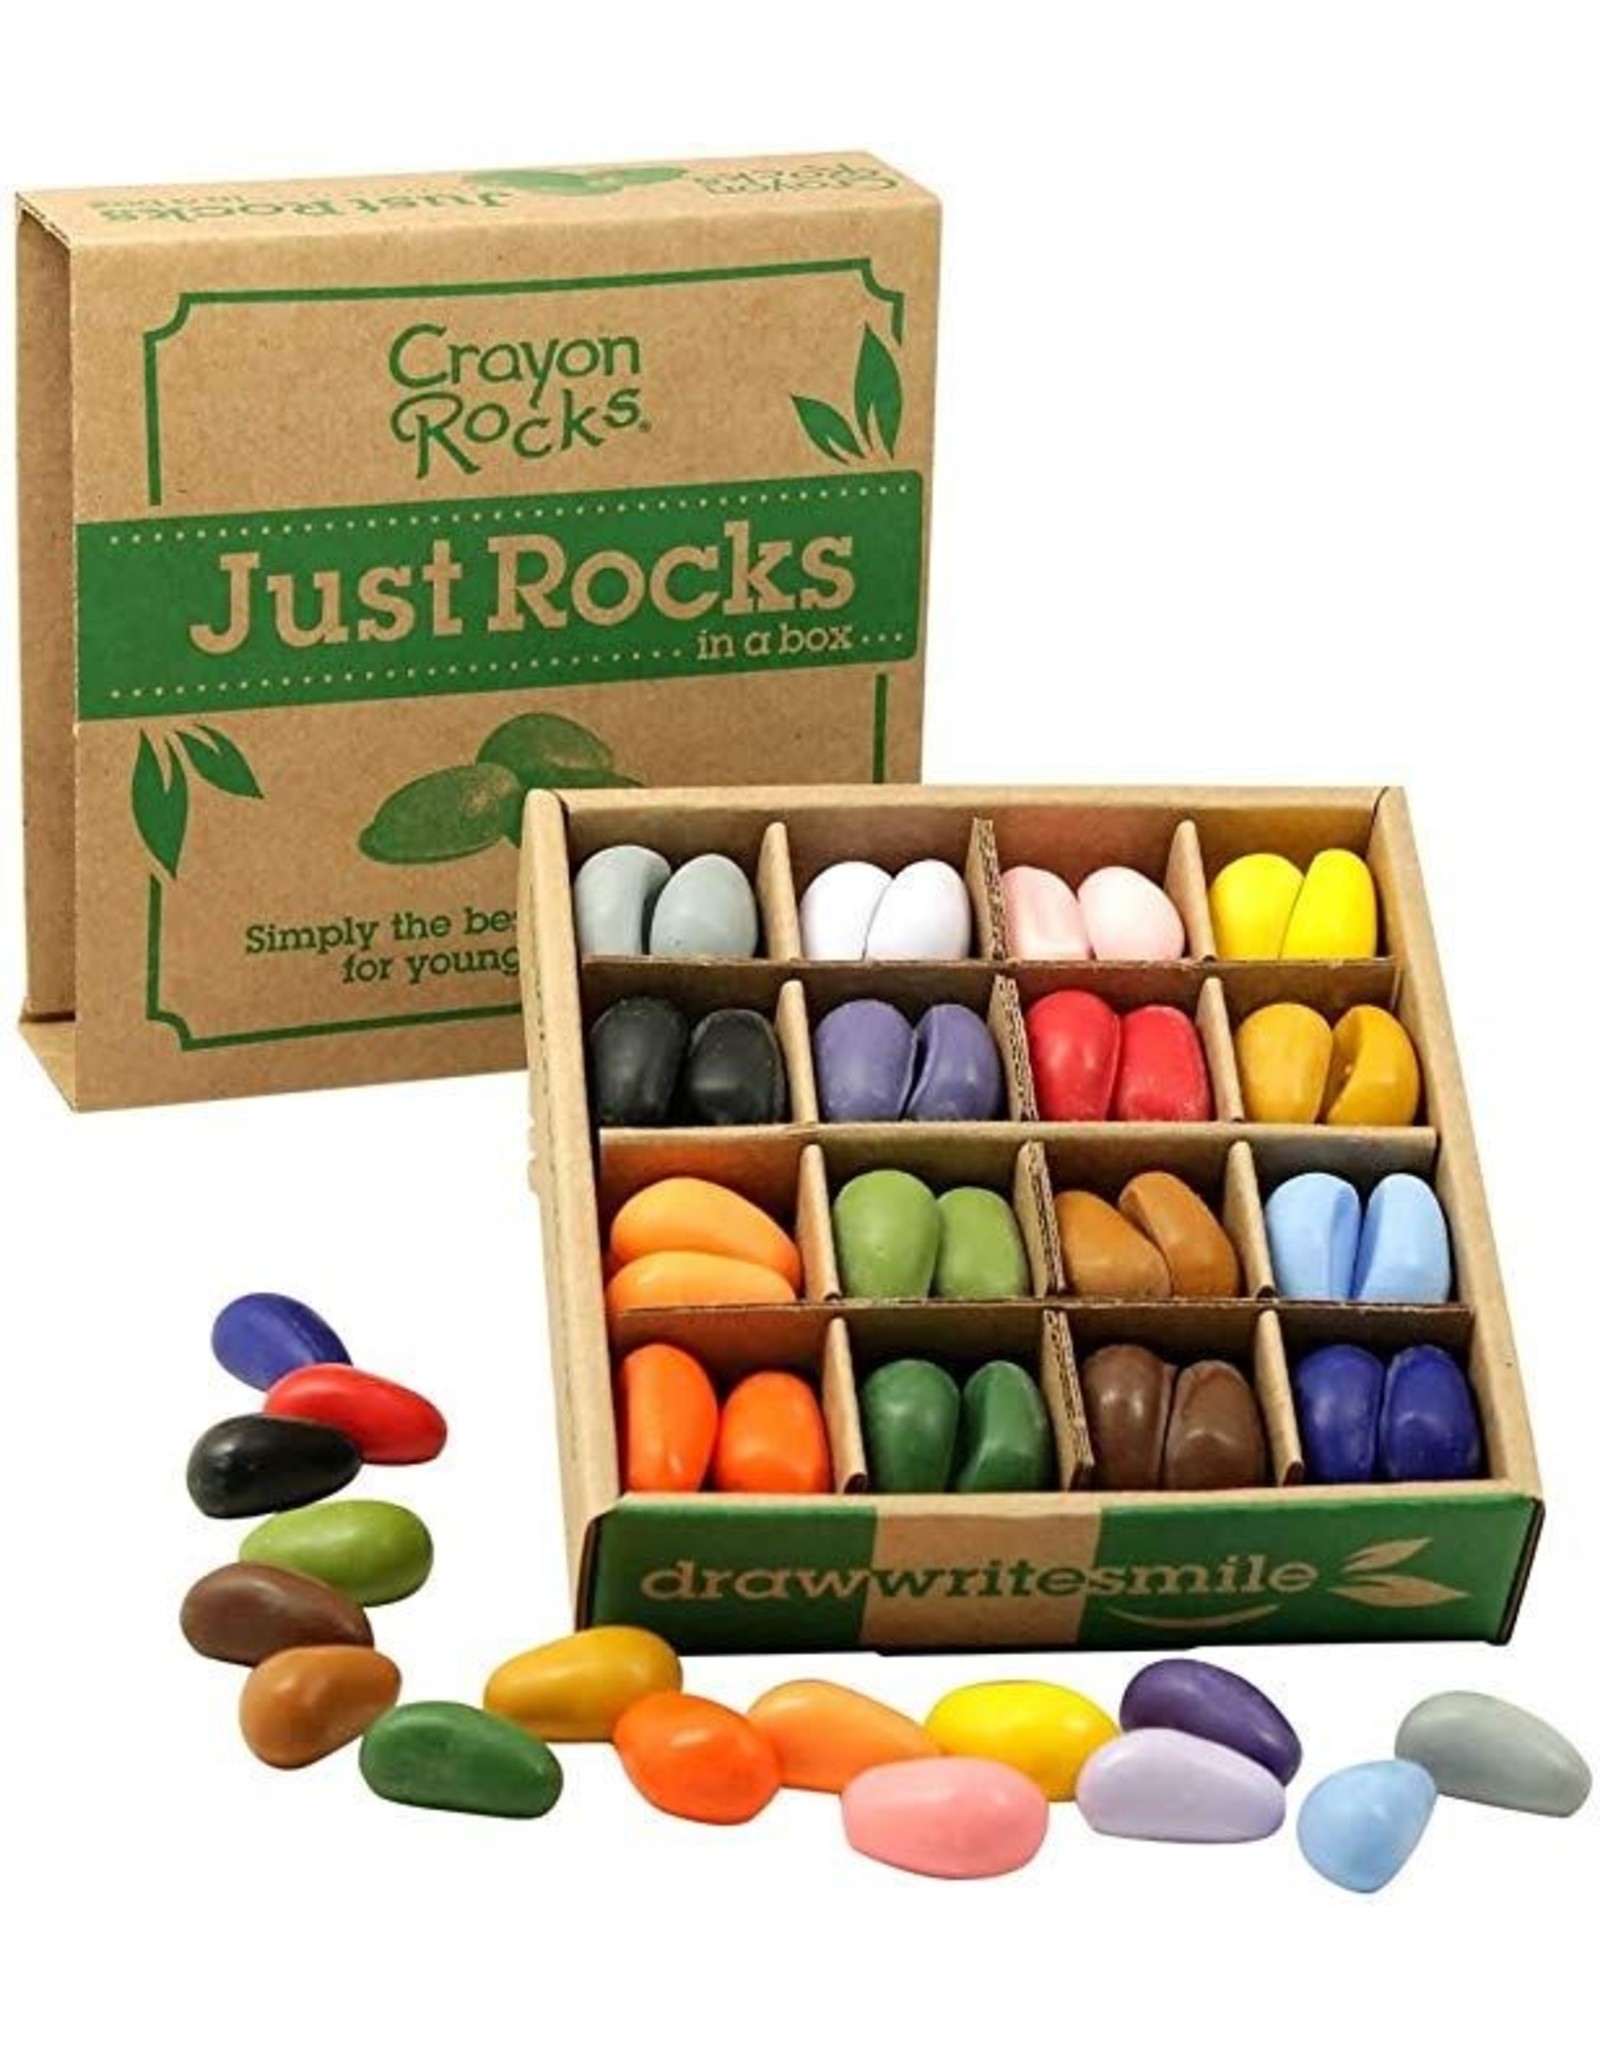 Just Rocks in a Box 64 count 16 Colors